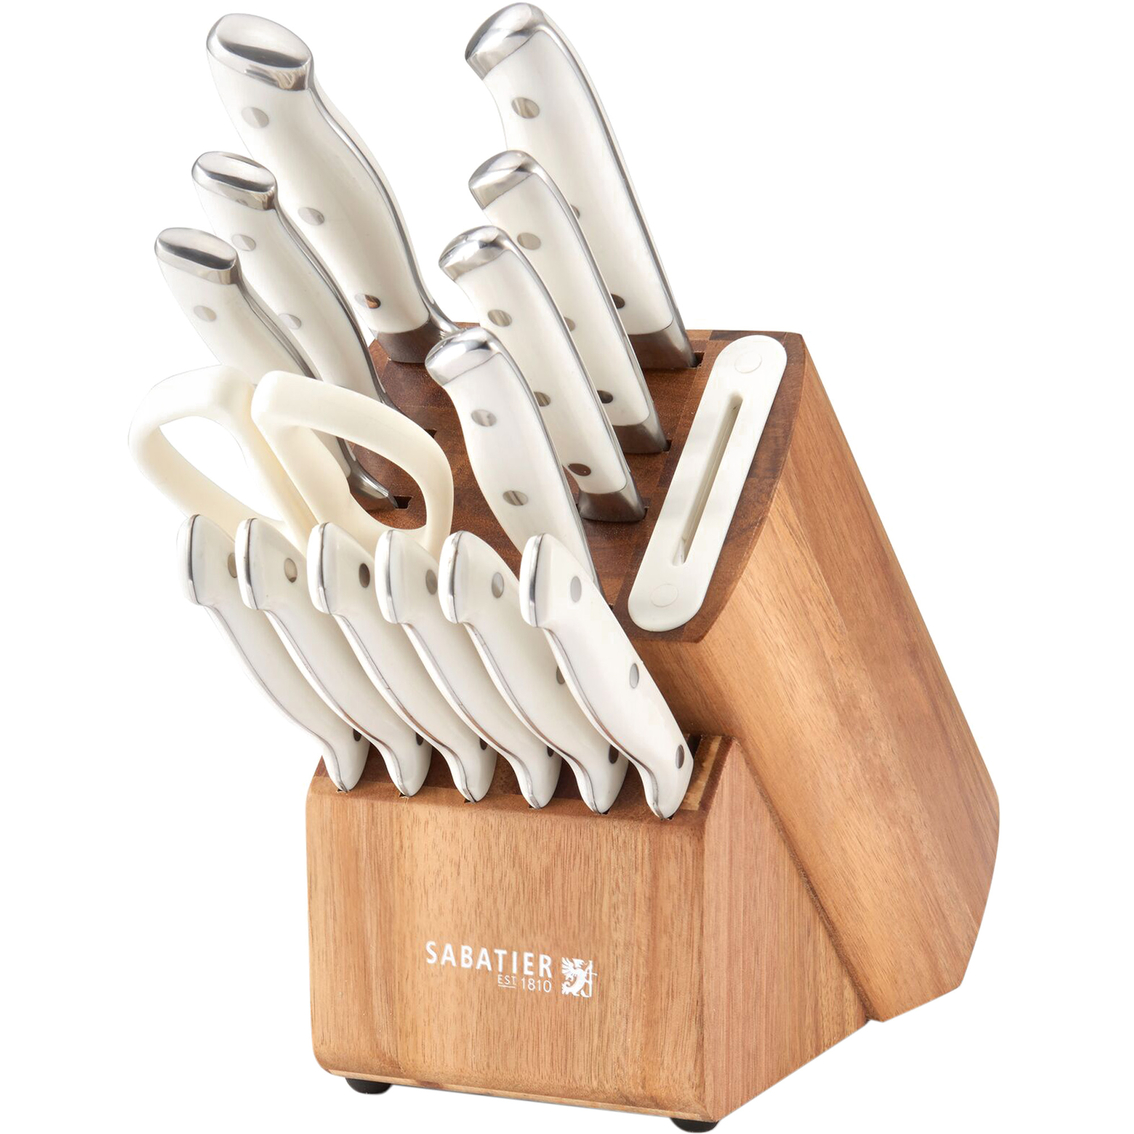 BergHOFF Essentials 15Pc Cutlery Set and Block Set with Sharpener